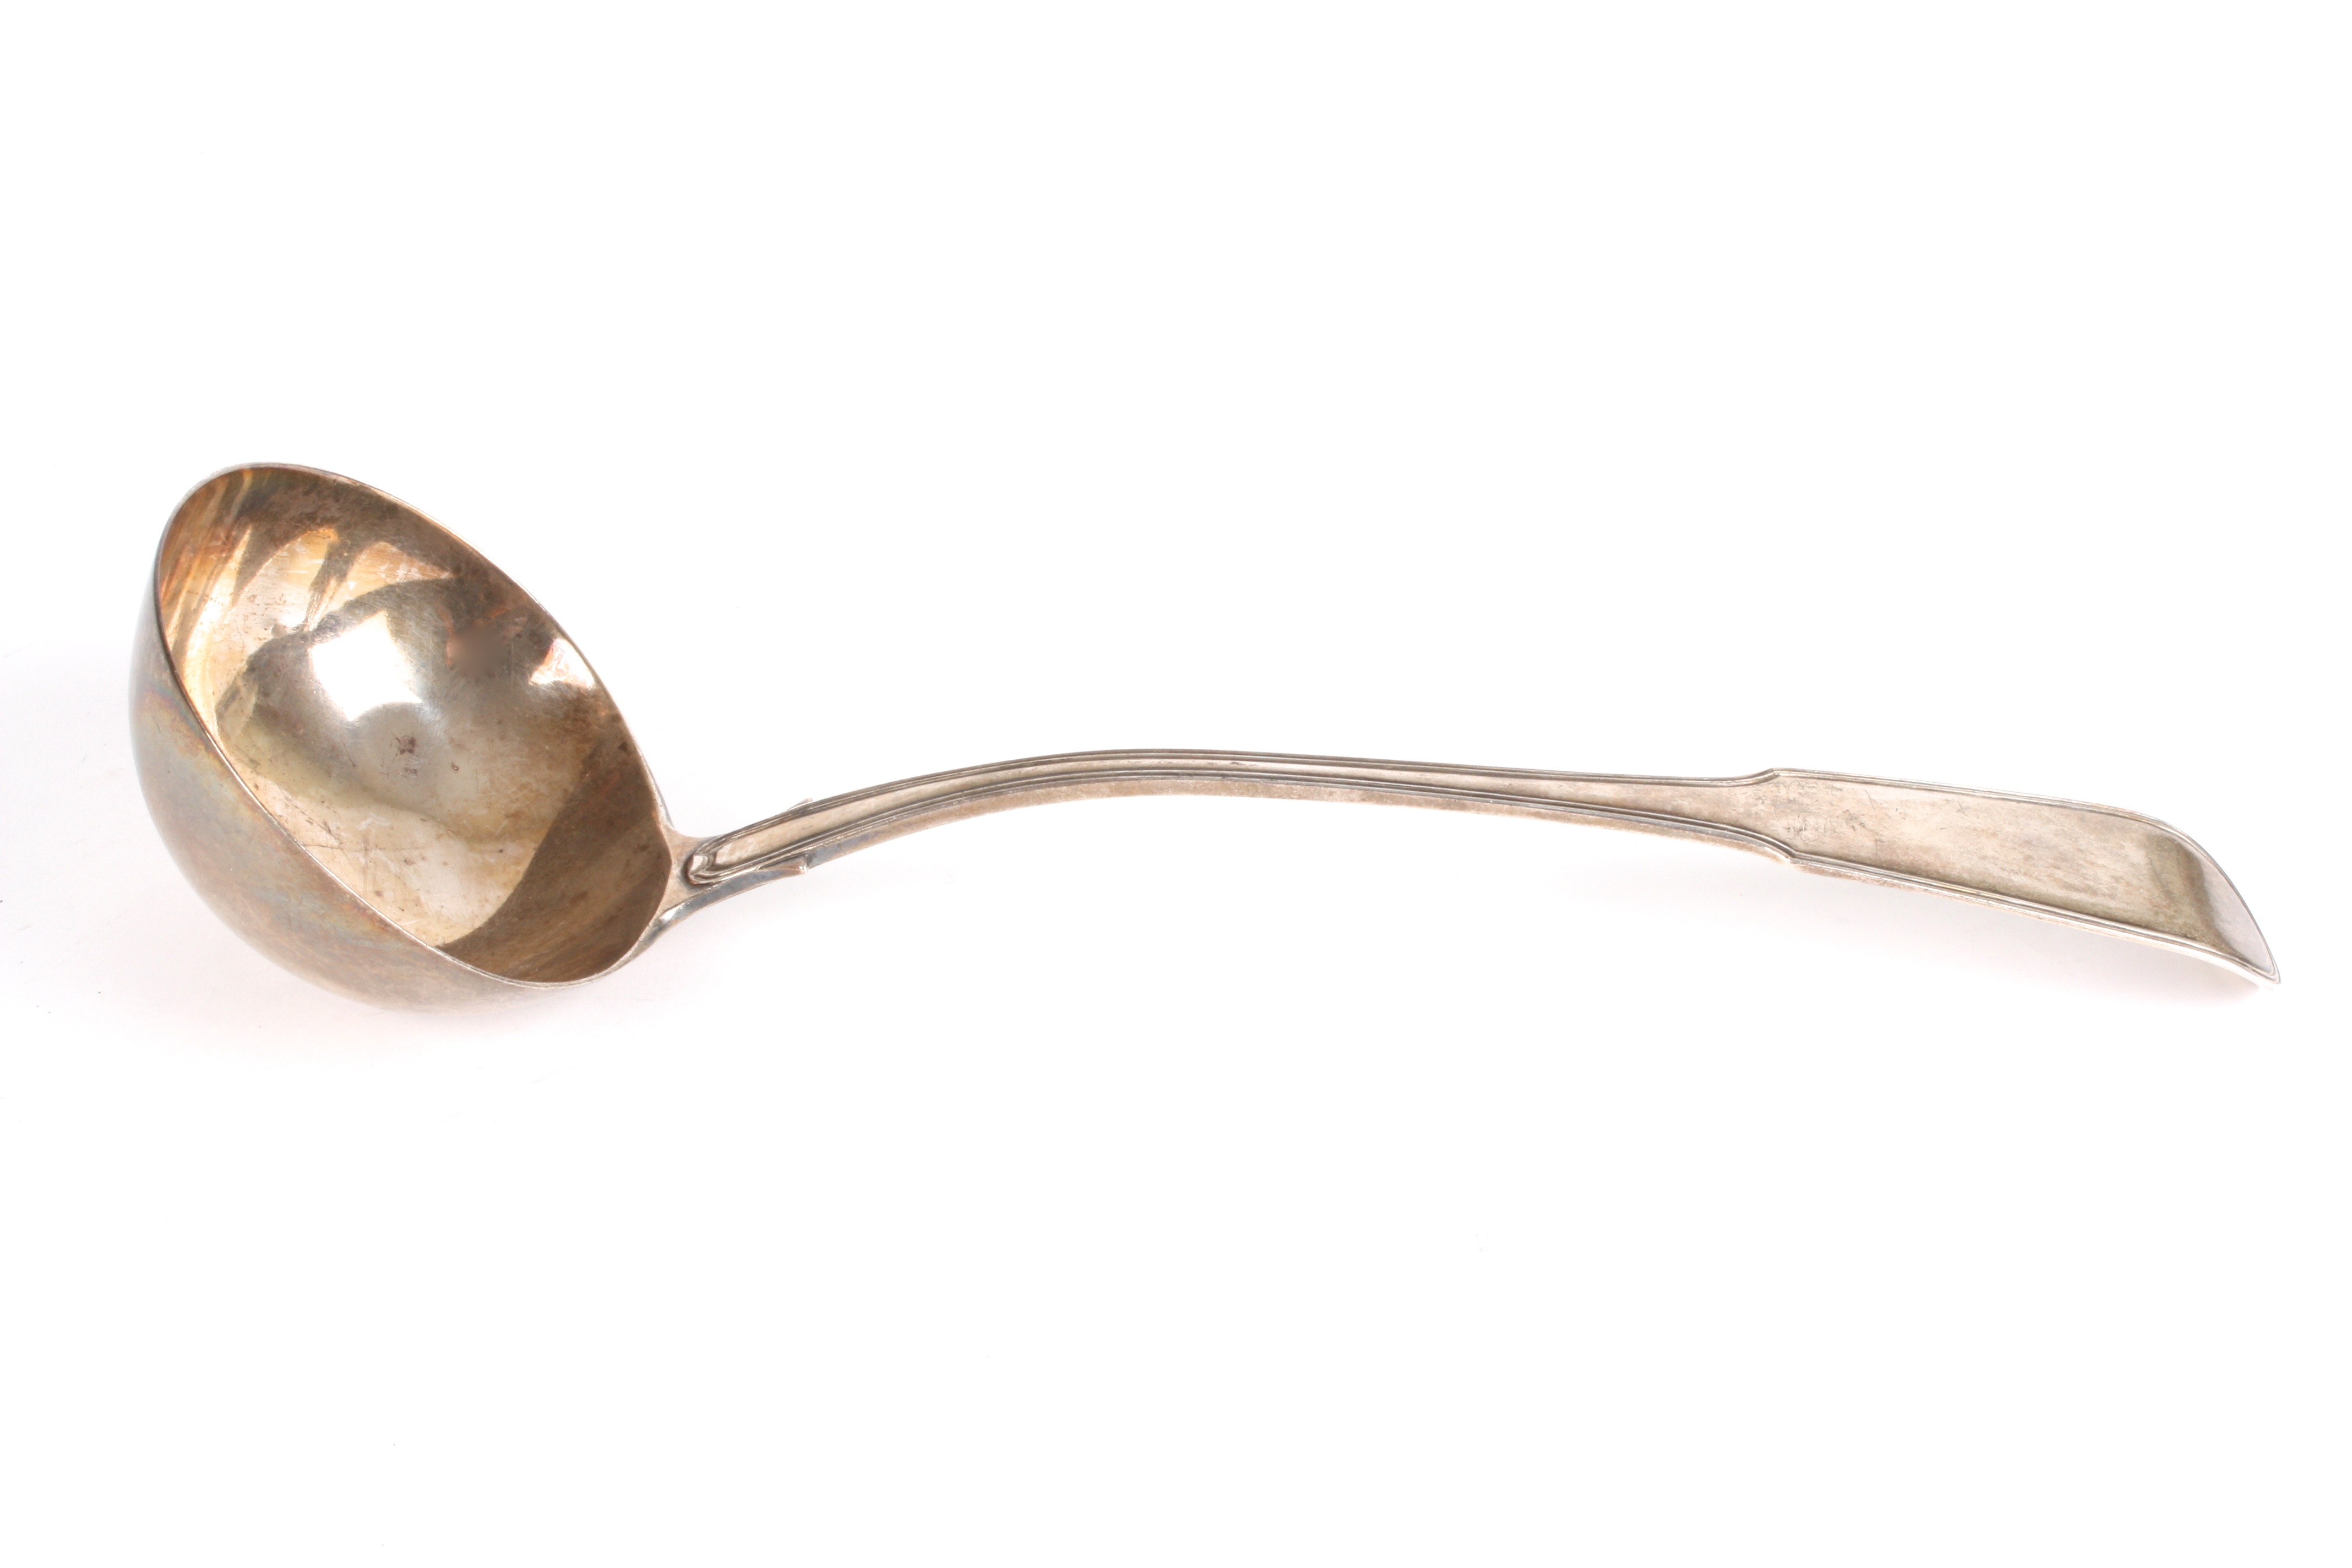 A George III silver soup ladle
hallmarked London 1811, fiddle and thread pattern.Dimensions: 6.75